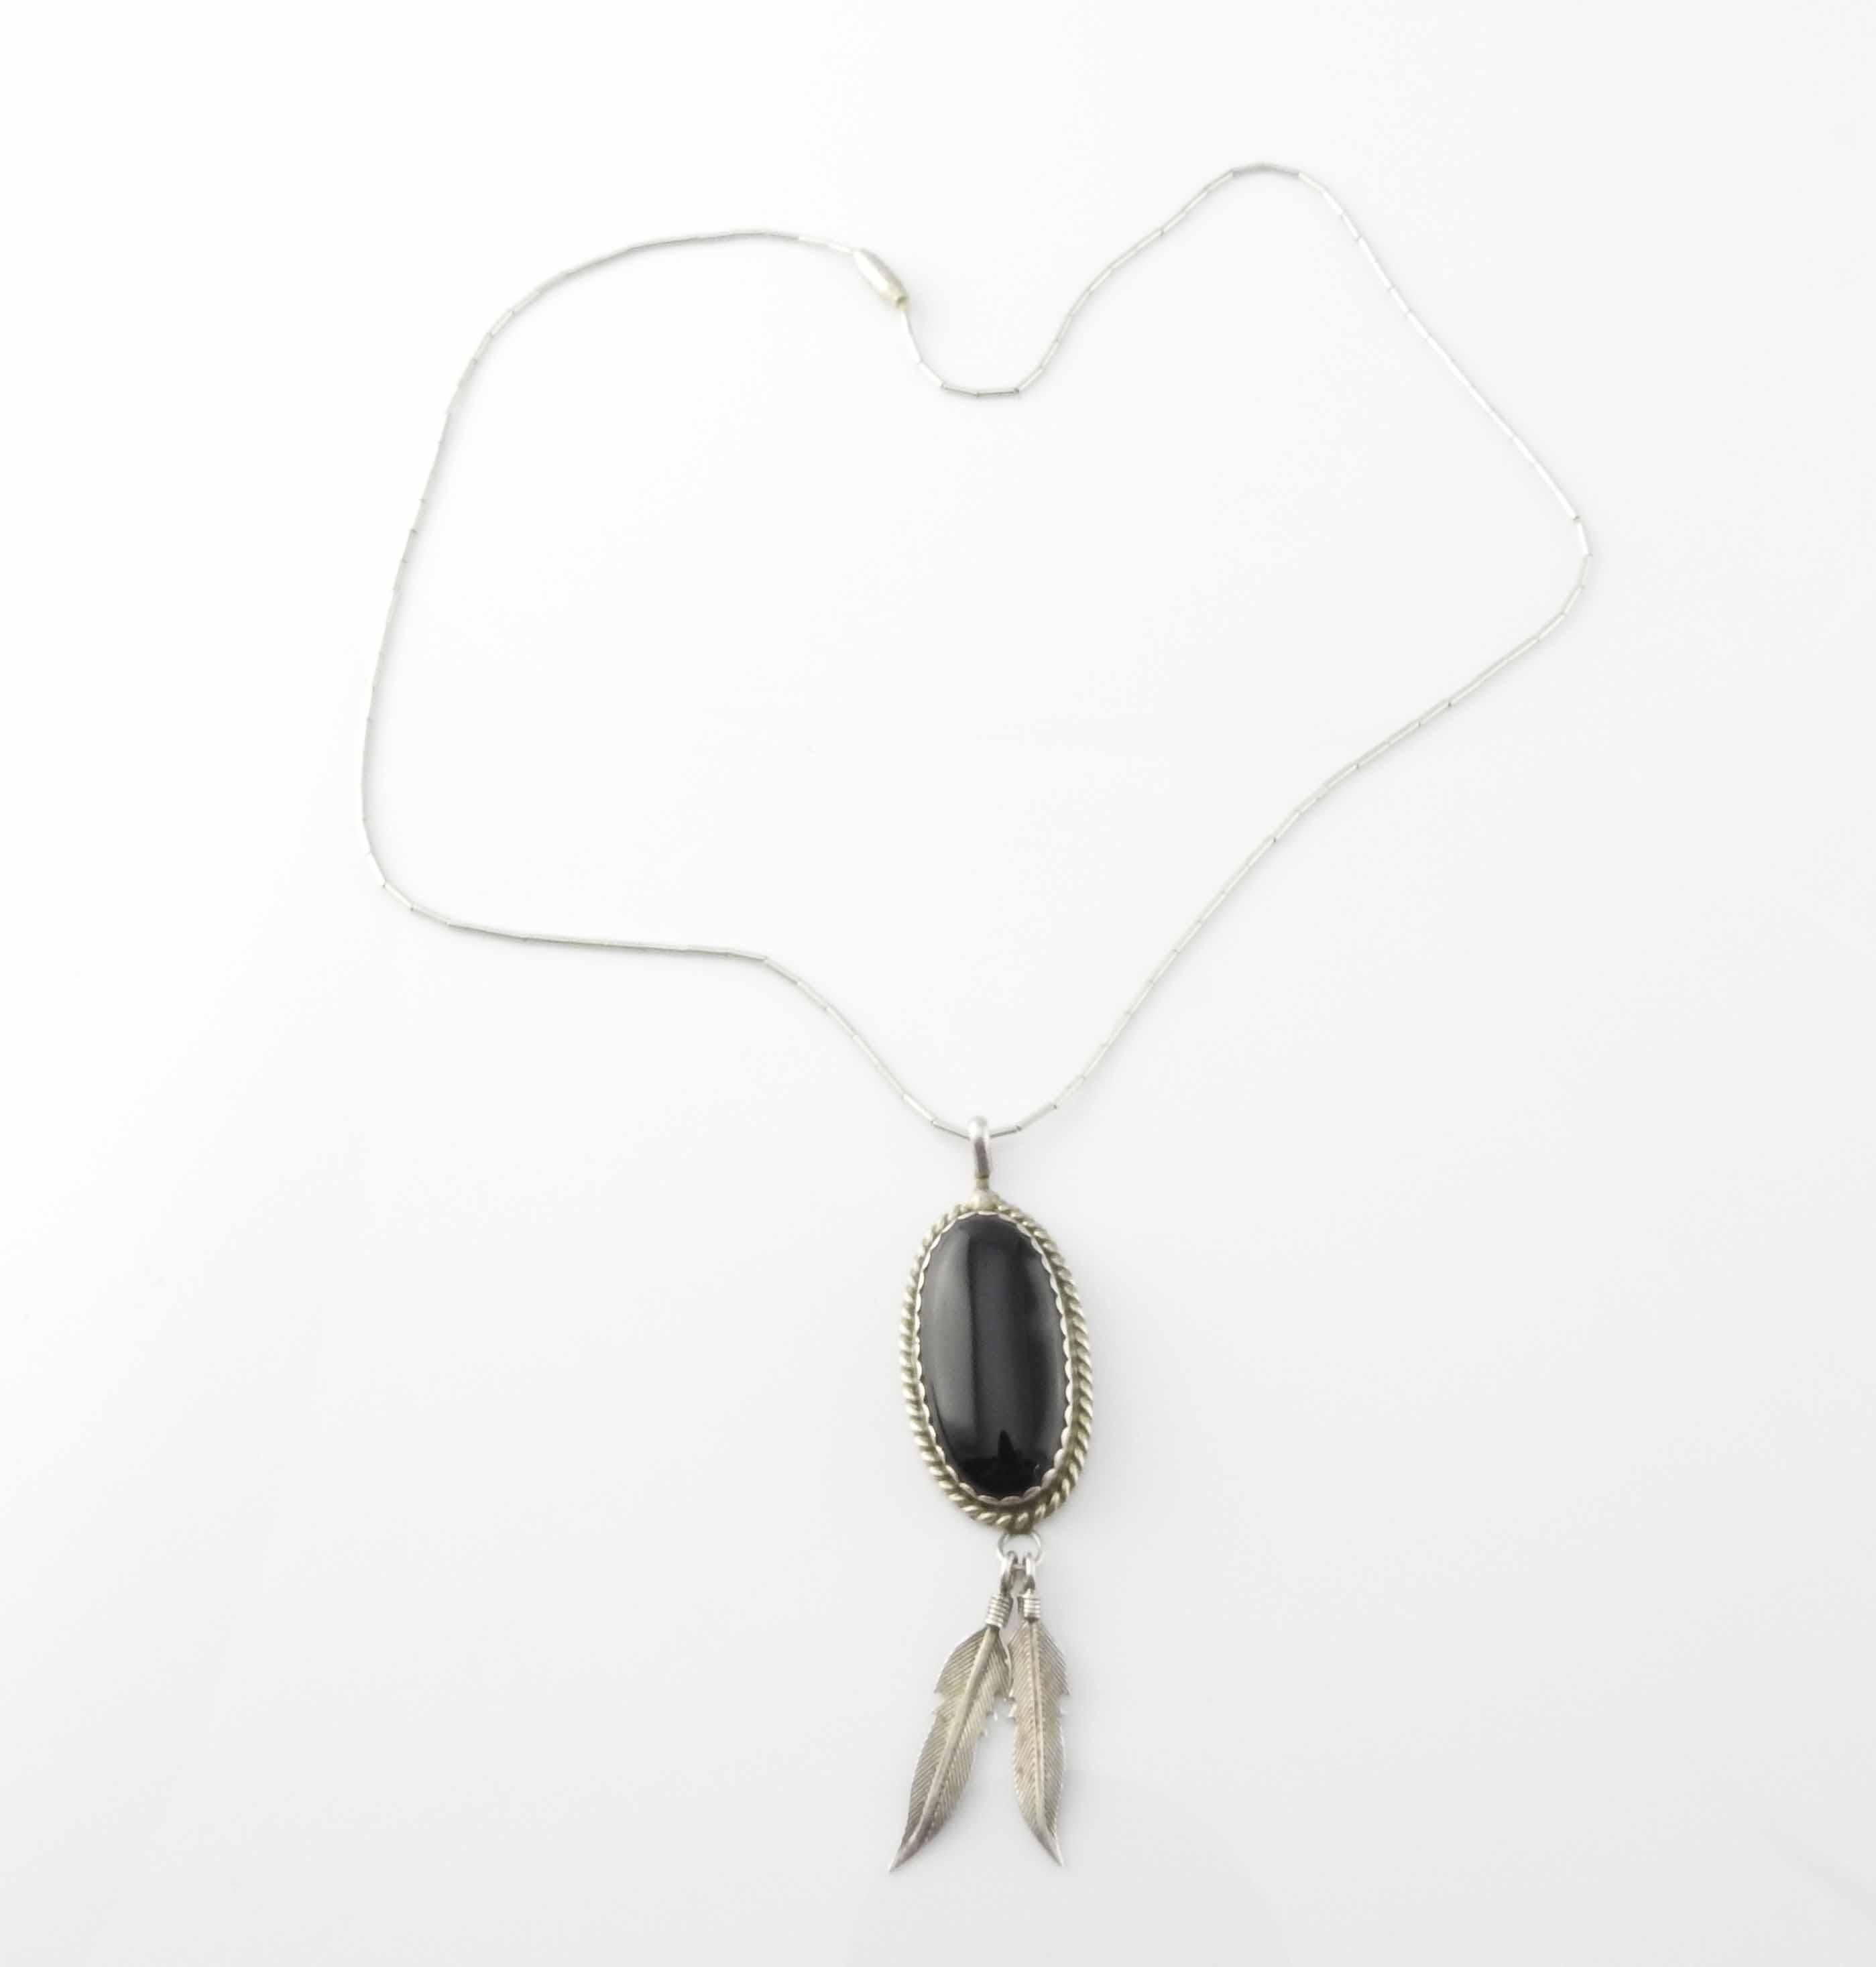 Native American 18 Inch Black Onyx Sterling Silver Feathers Necklace

Possibly by Keith James.

Marked: Sterling

Signed: K

Measurements: 18 inch strand

Center pendant: 9/16